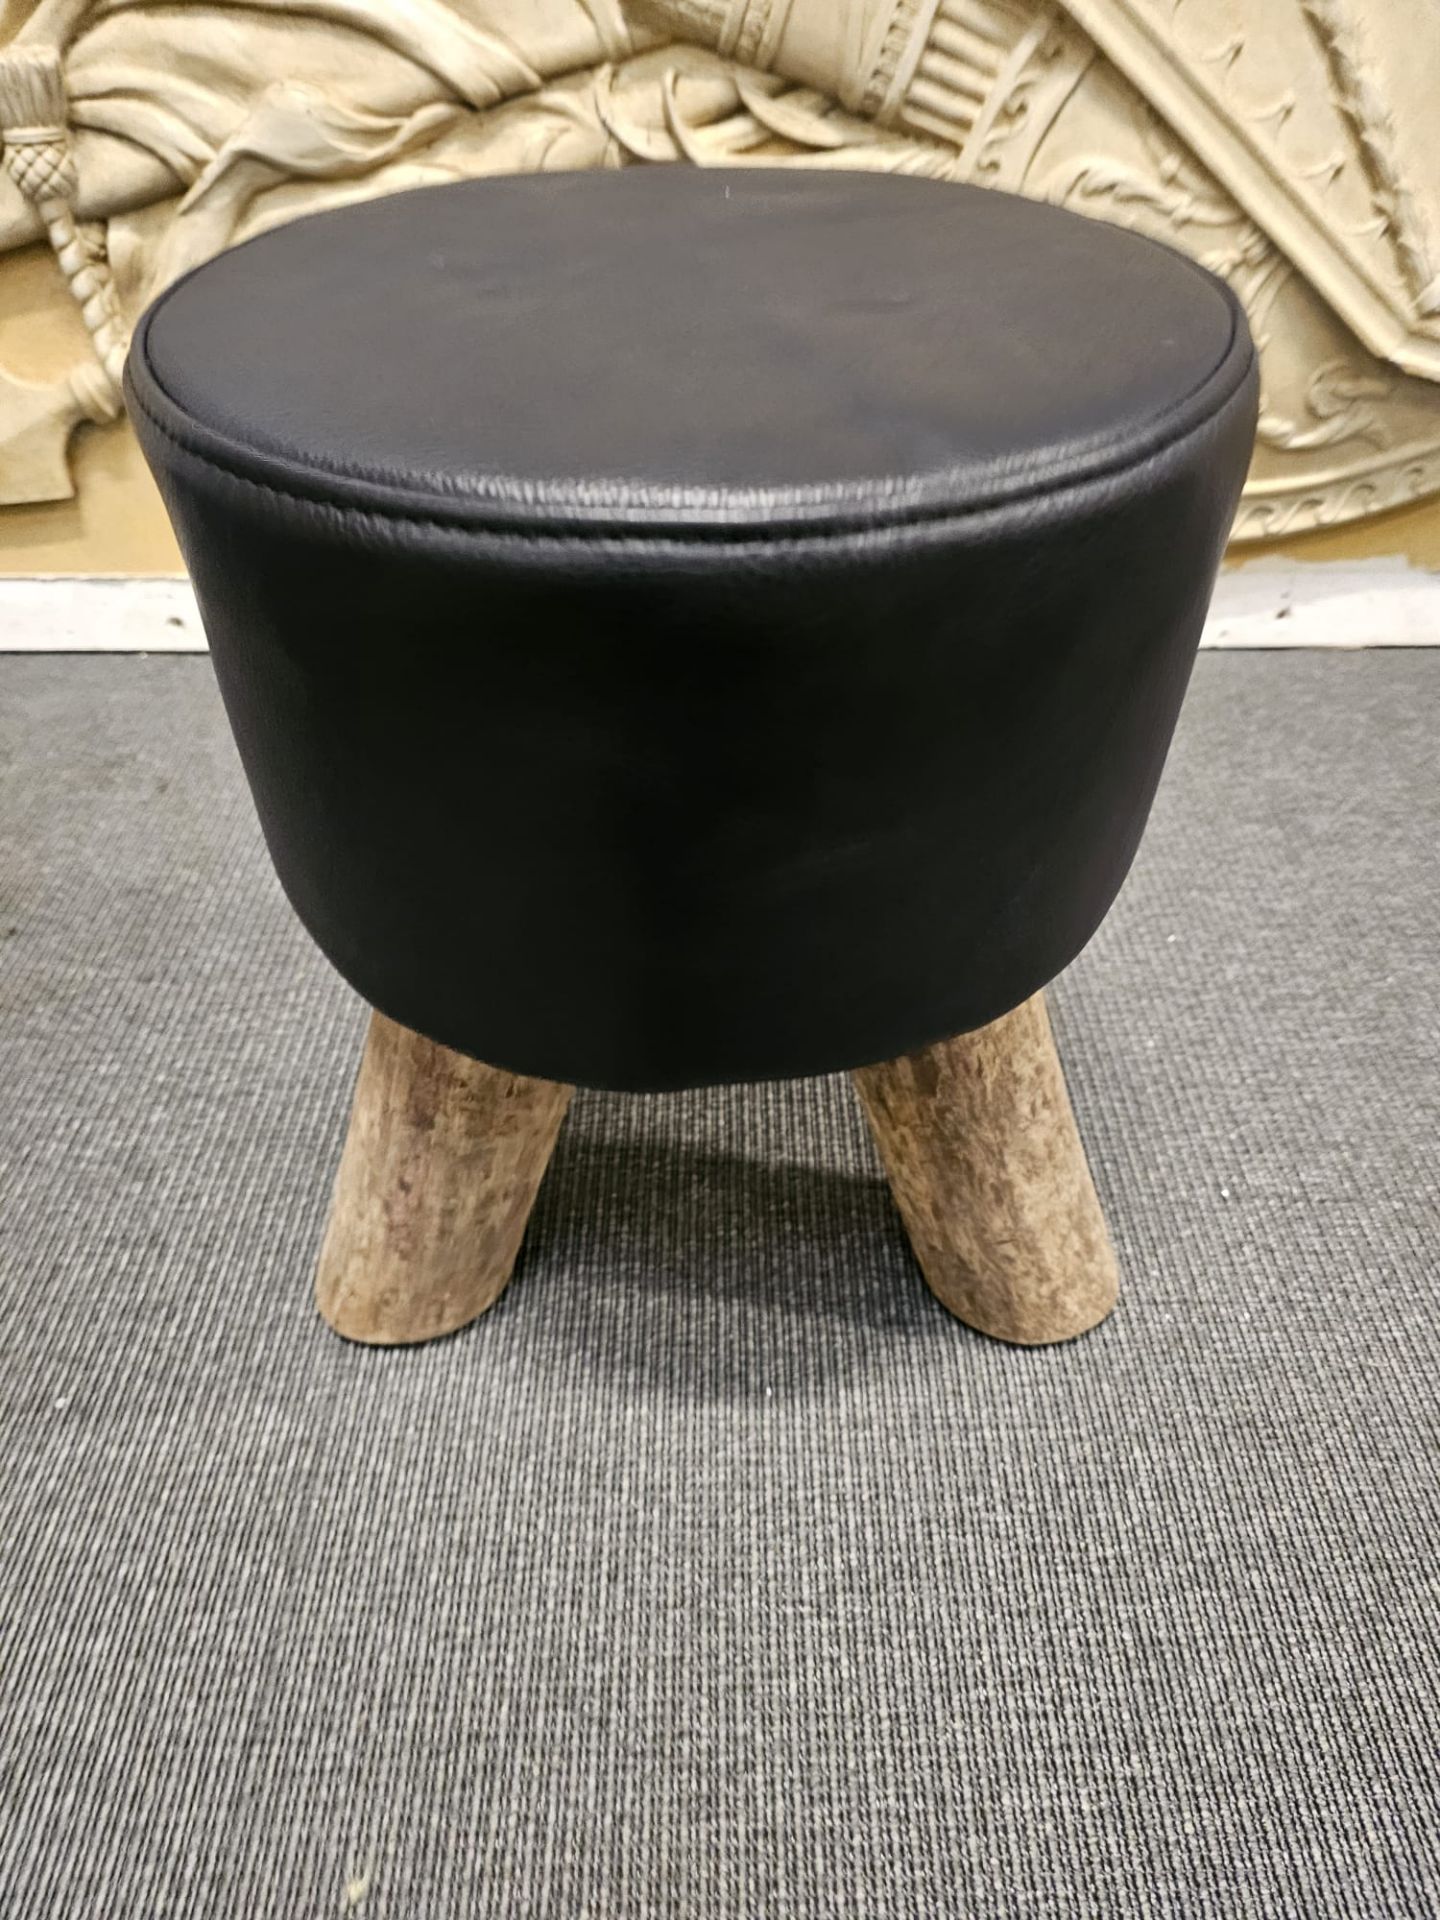 Bleu Nature F016 Mousse Driftwood And Leather Stool Finished In Matador Nero Hide Leather 380 x